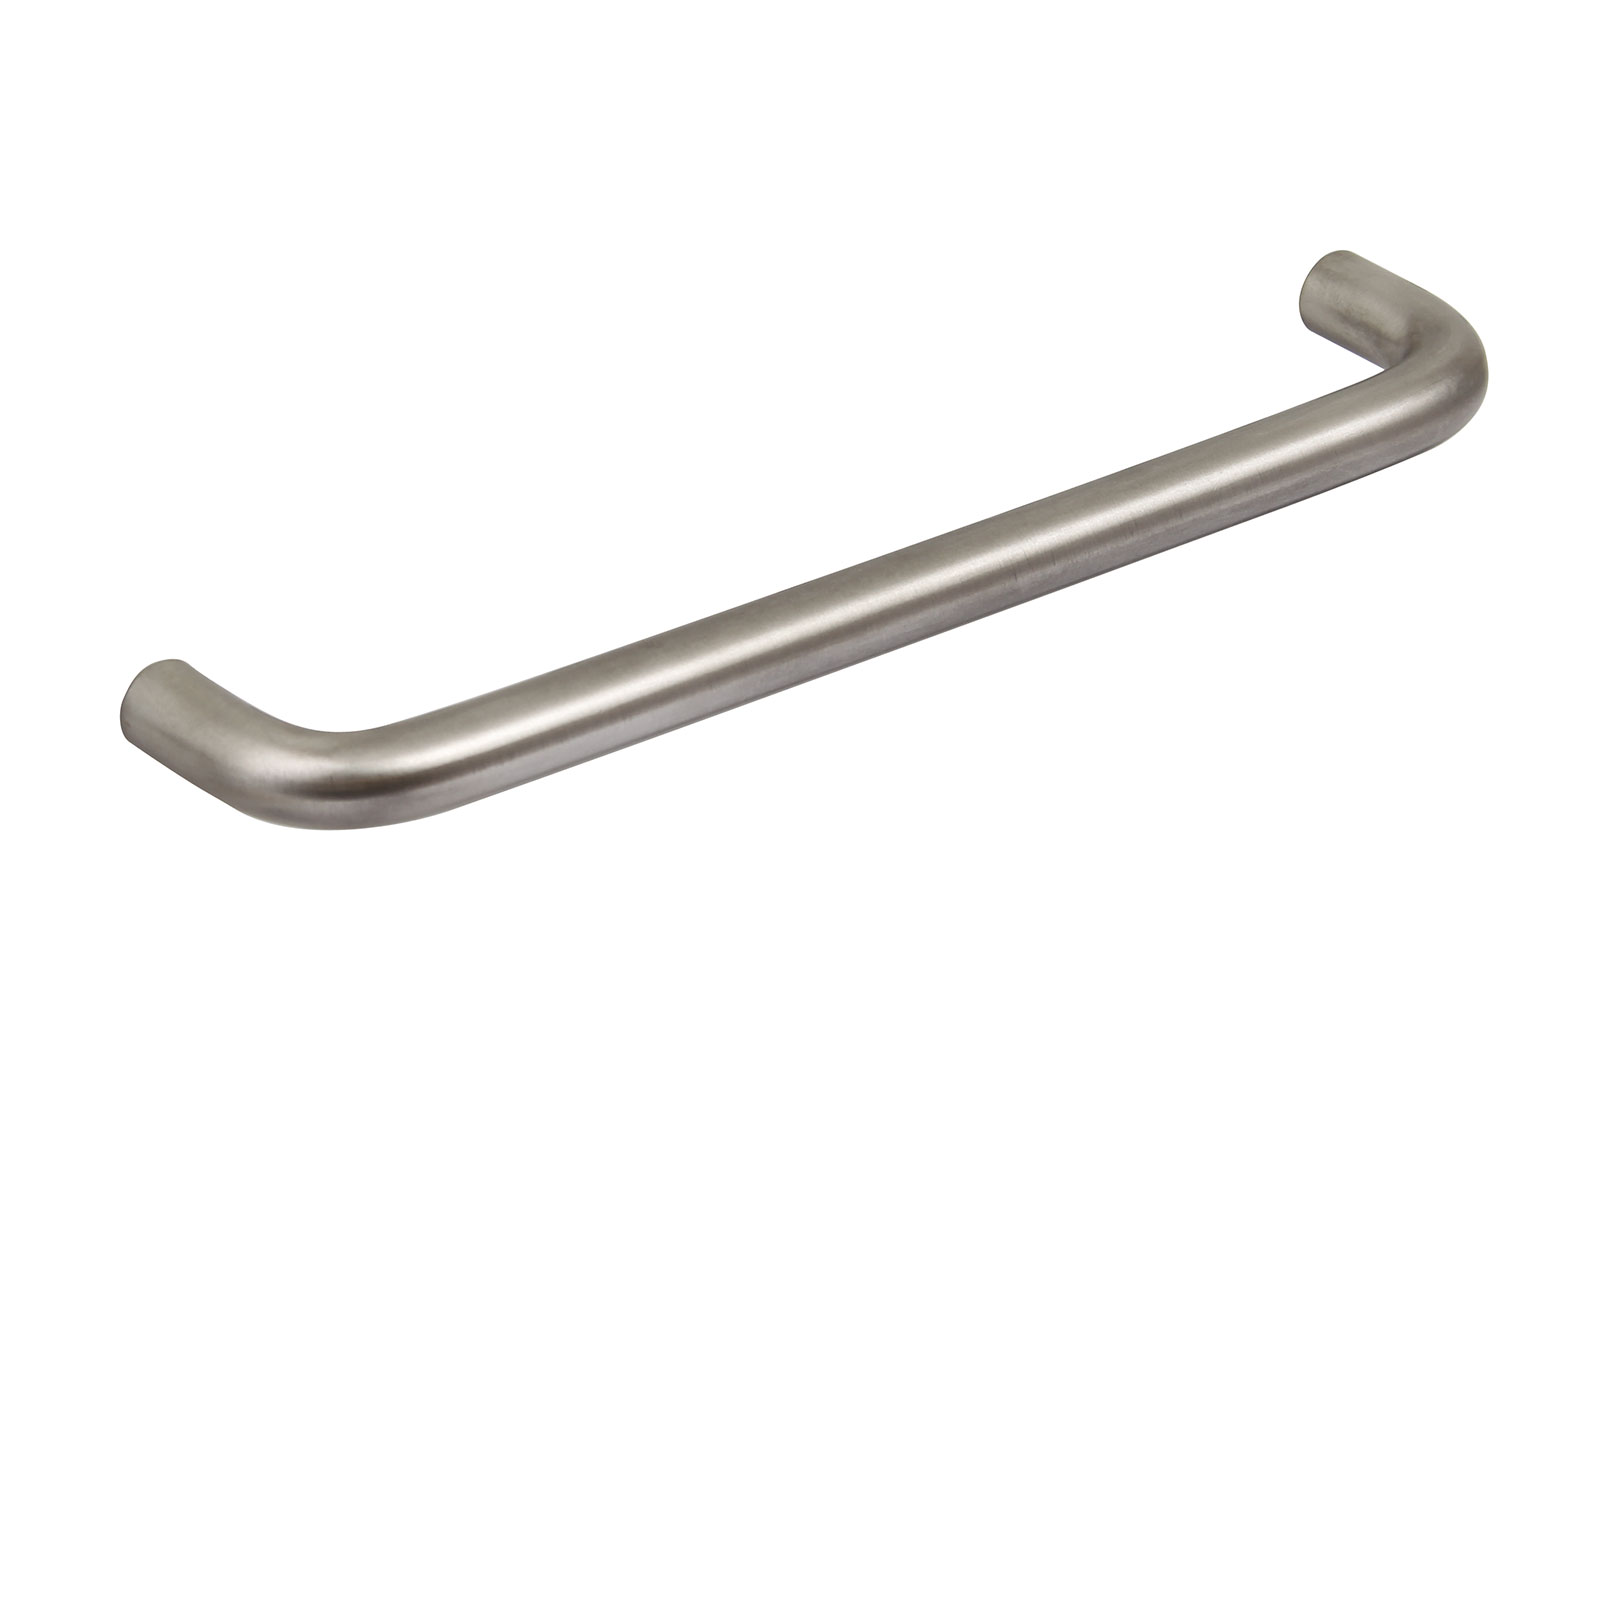 Shop Stainless steel handles